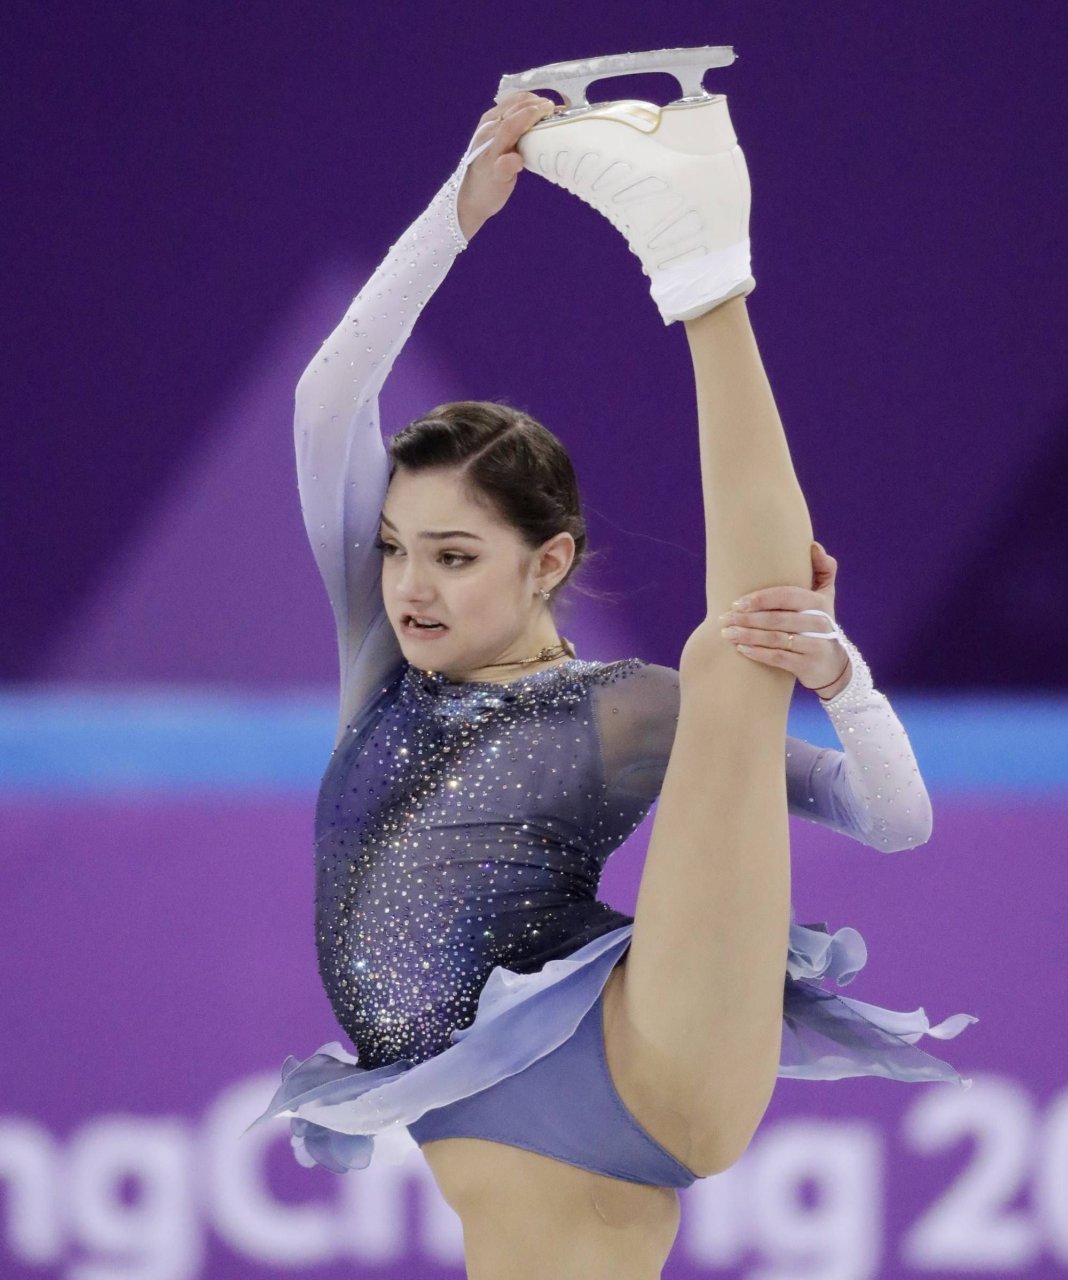 best of Gymnast upskirt images olympic